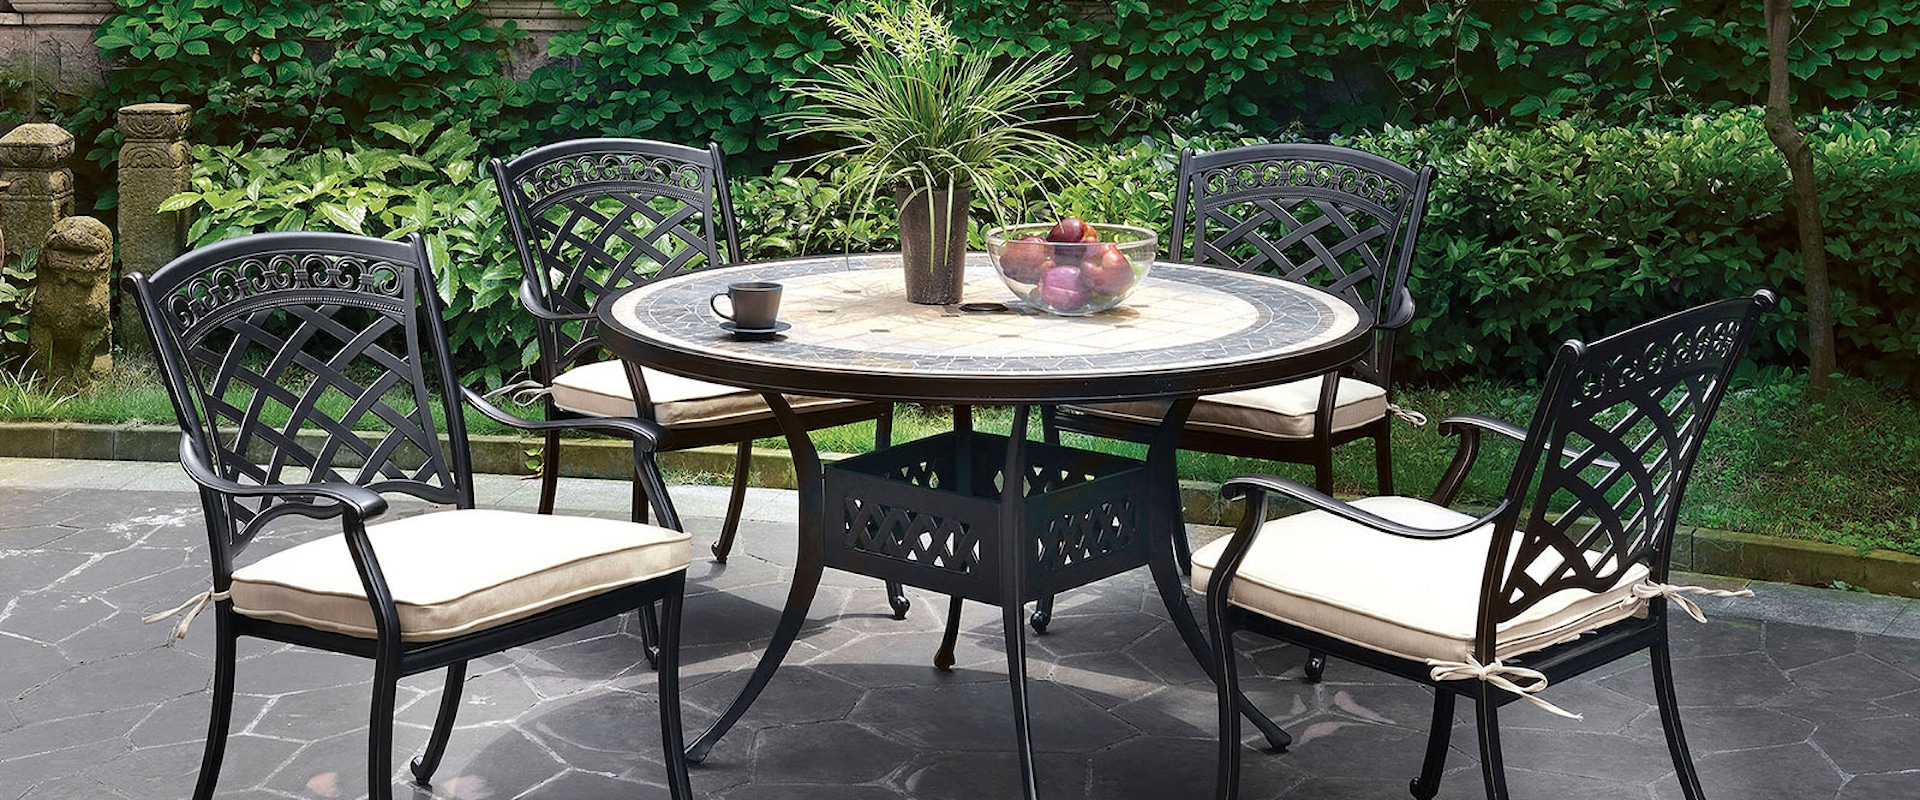 Transitional Round Table + 4 Arm Chairs